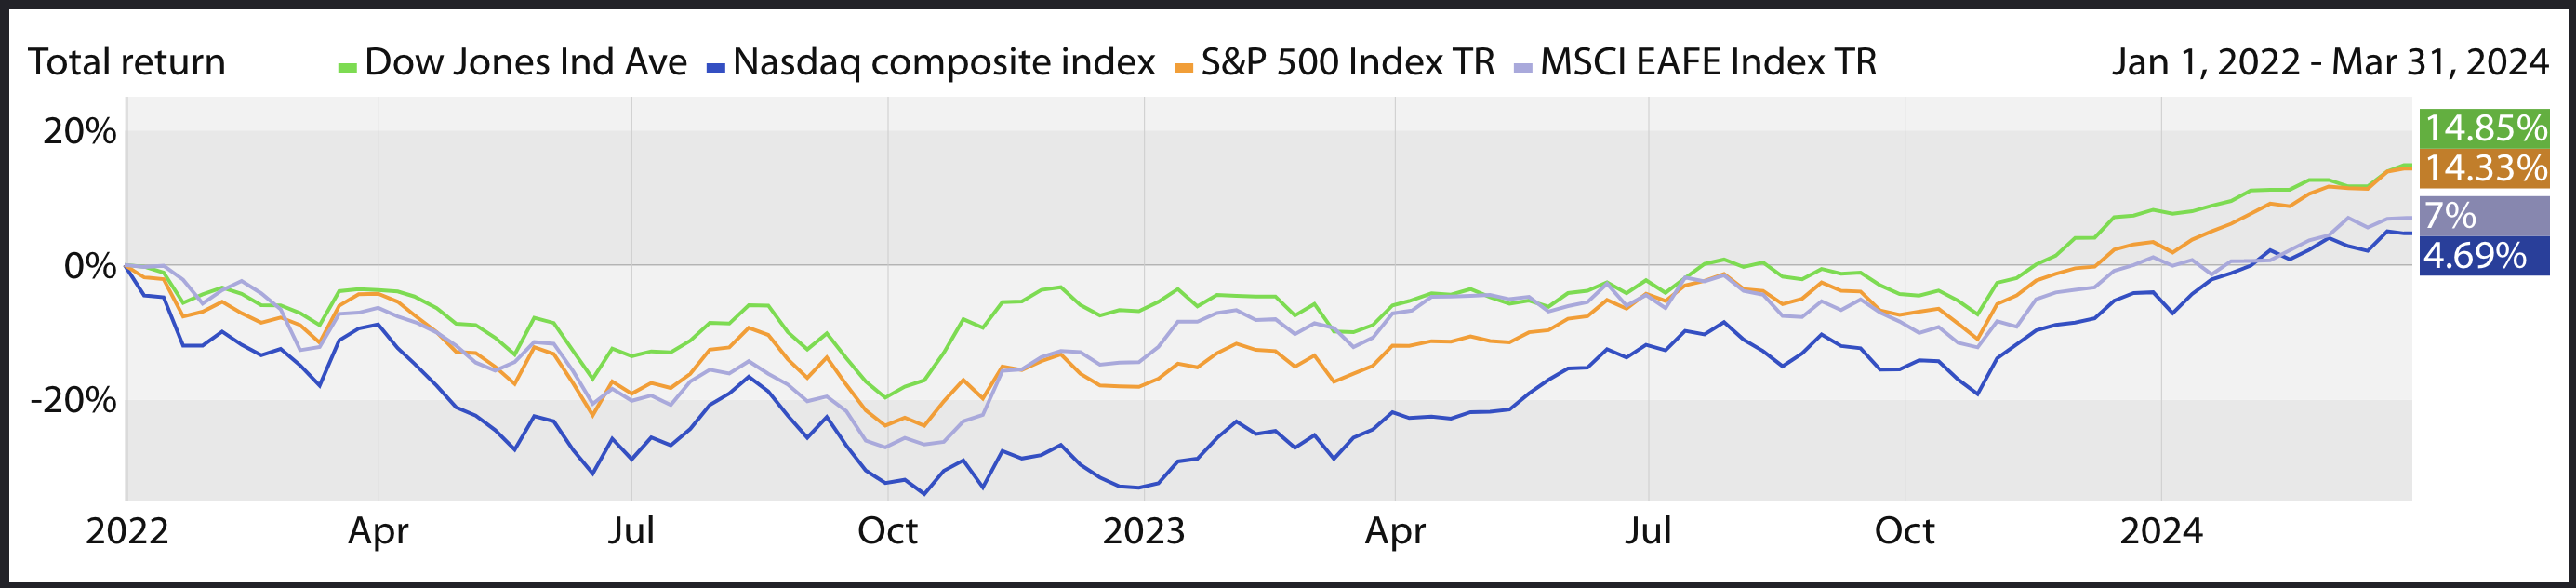 Total S&P 500 index return March 2022 - March 2024